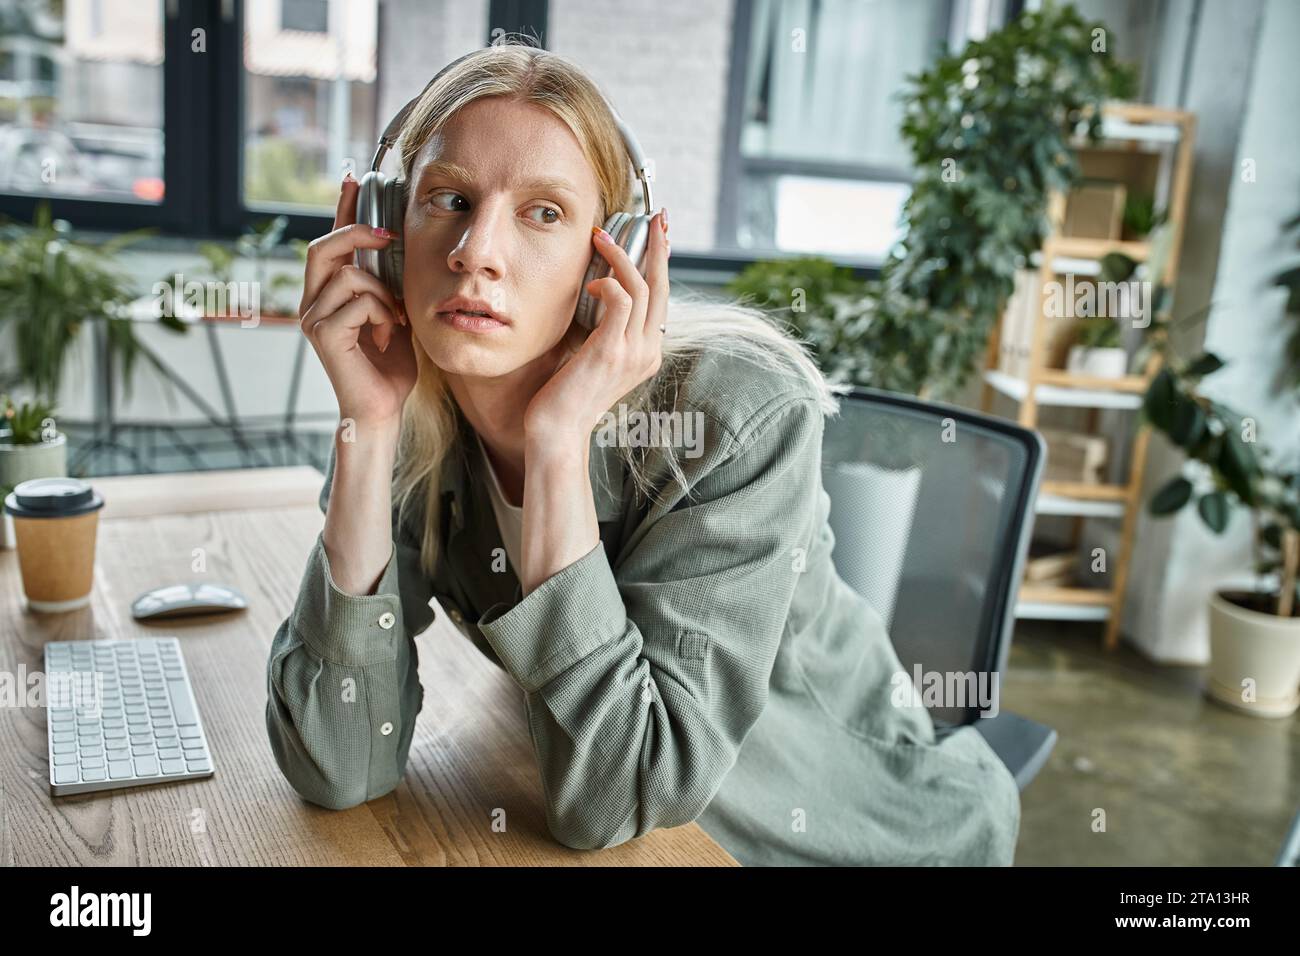 appealing androgynous person sitting at desk with headphones and looking away, business concept Stock Photo